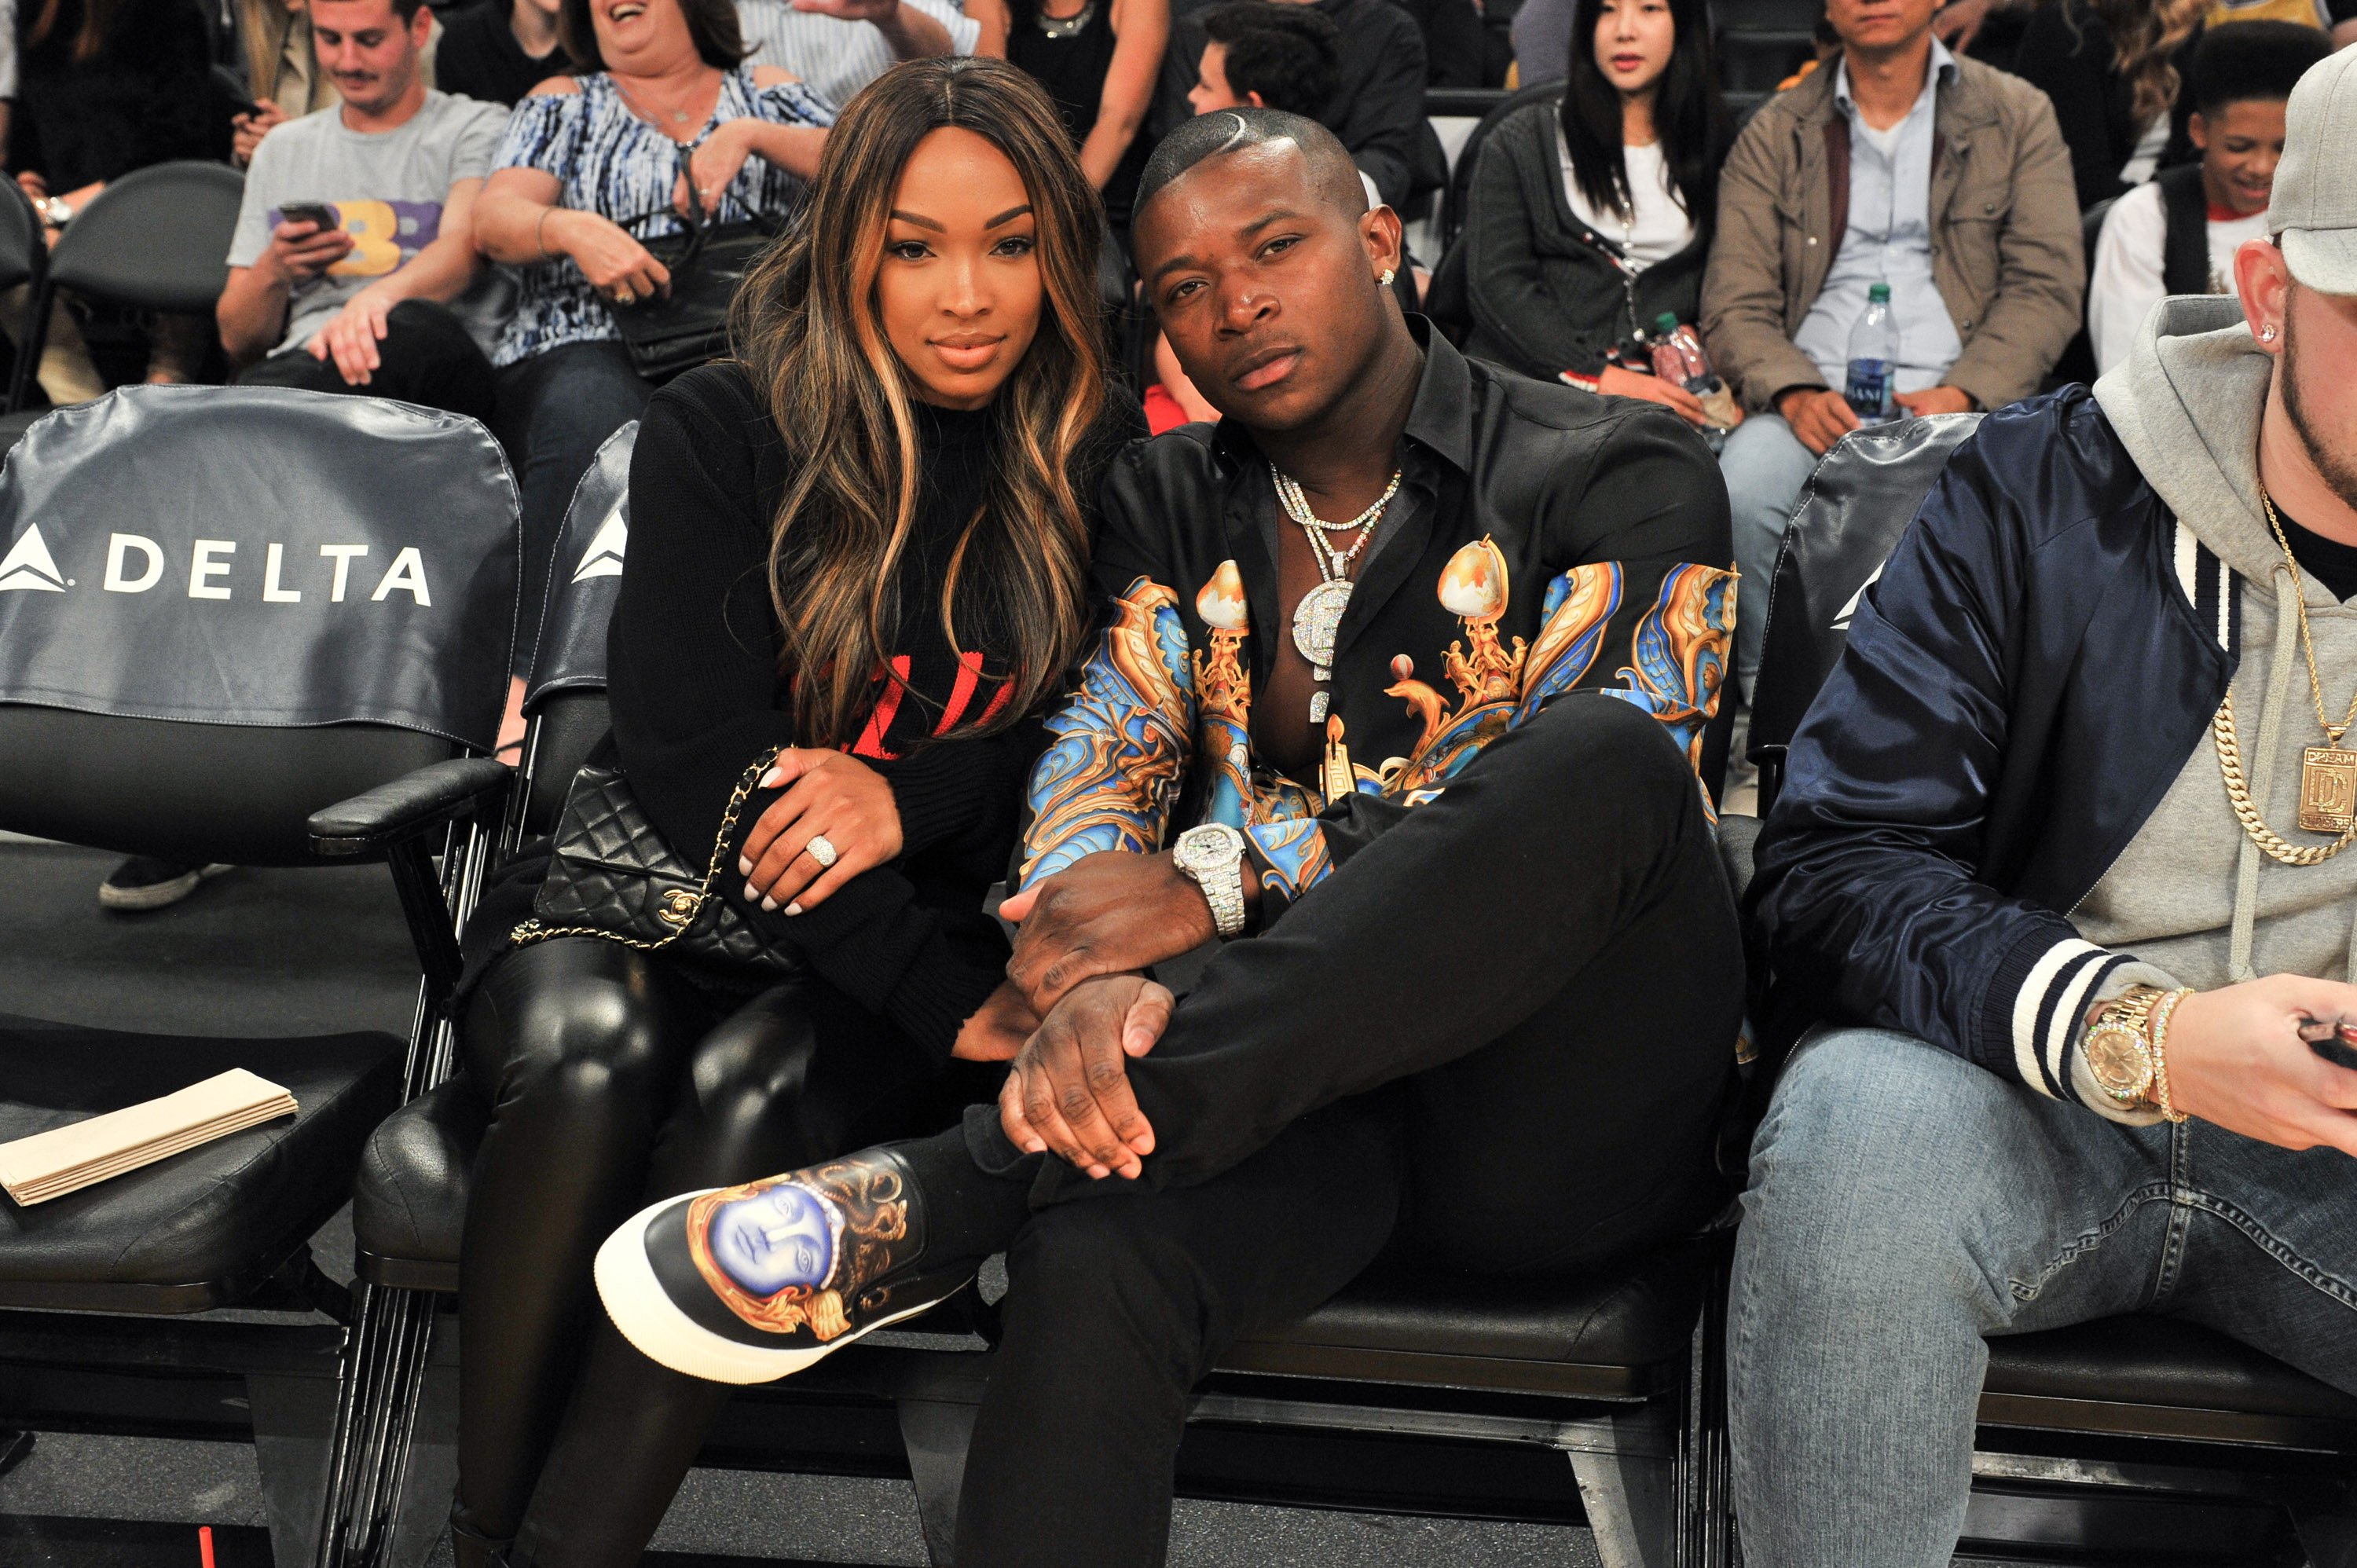 Malika Haqq & O.T. Genasis attend a basketball game on November 21, 2017 in California | Source: Getty Images